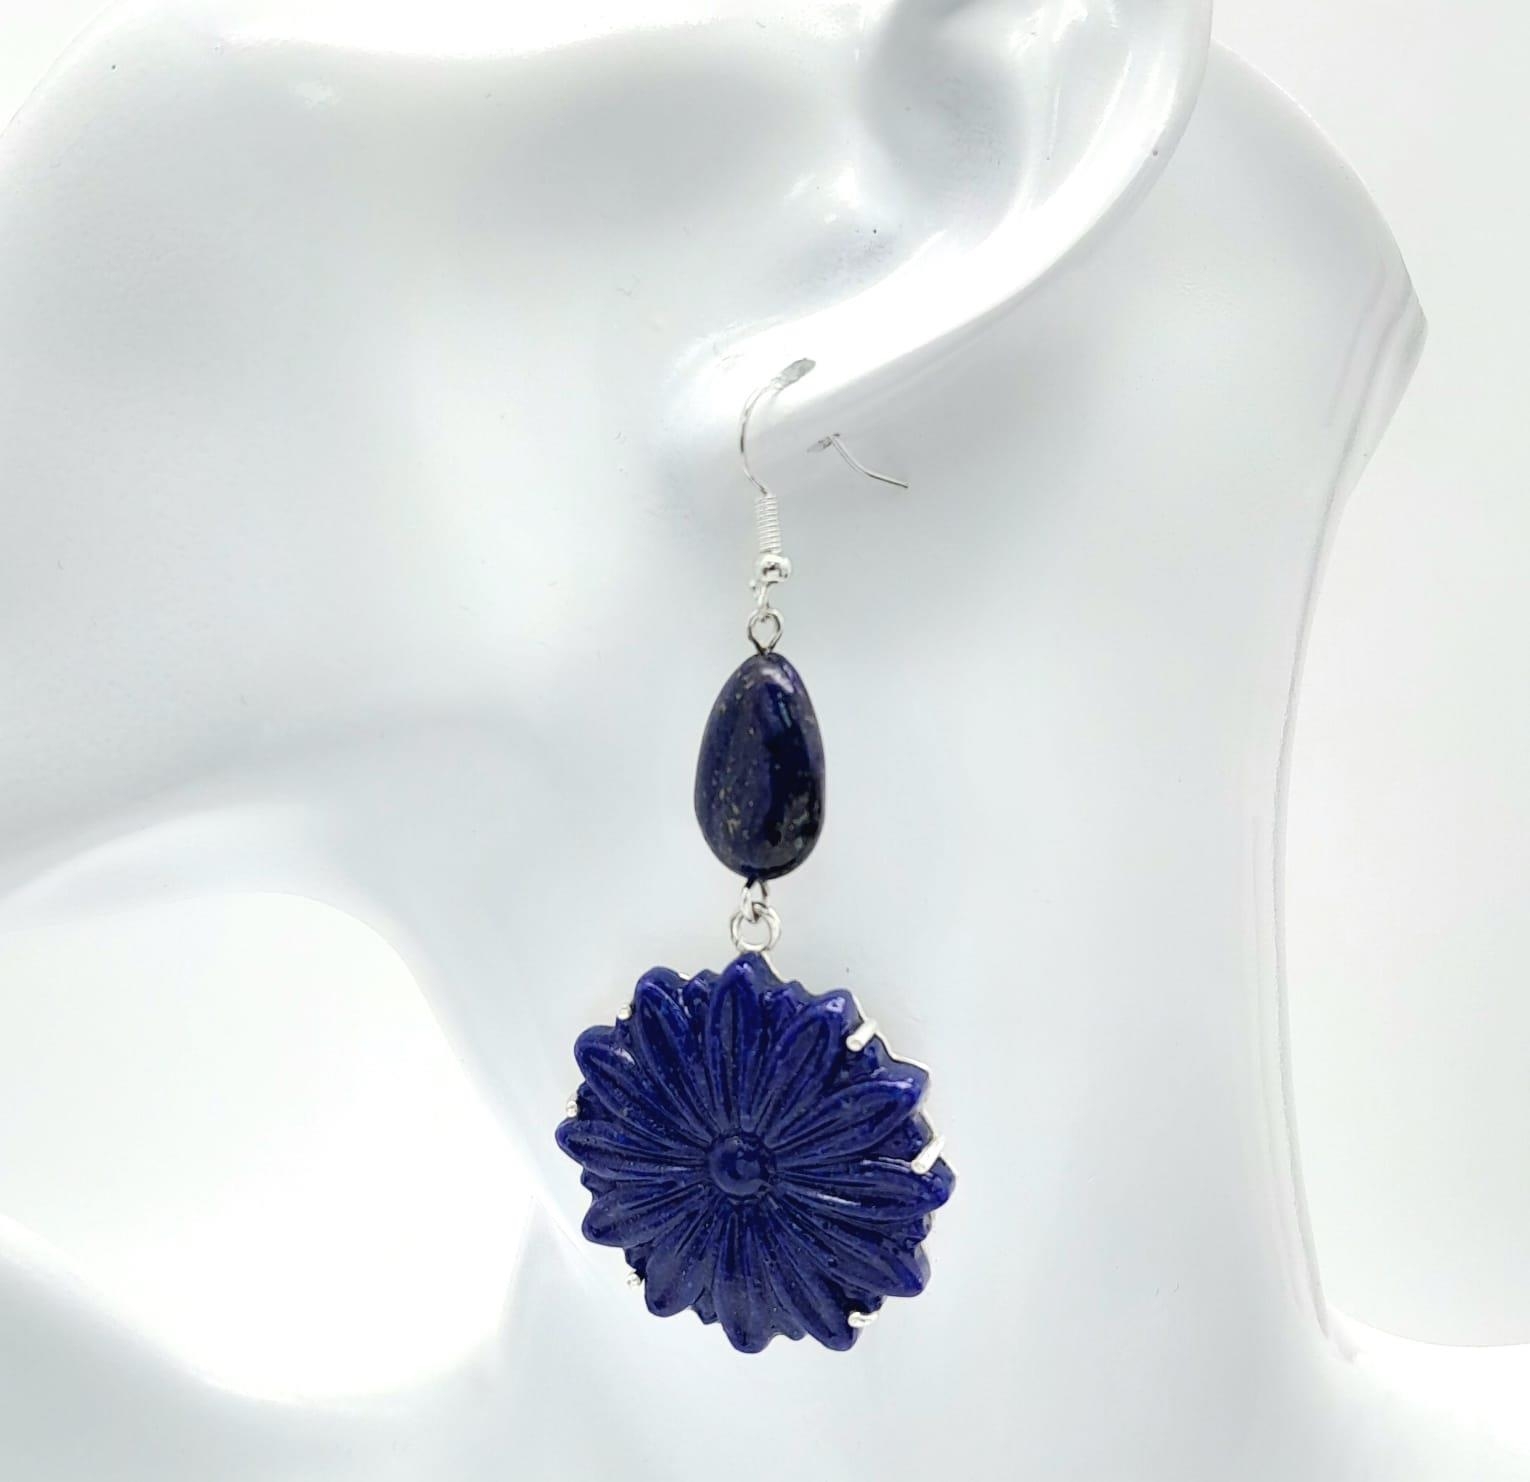 A Tibetan silver and lapis lazuli necklace and earrings set with large, carved, flower shaped discs. - Image 5 of 5